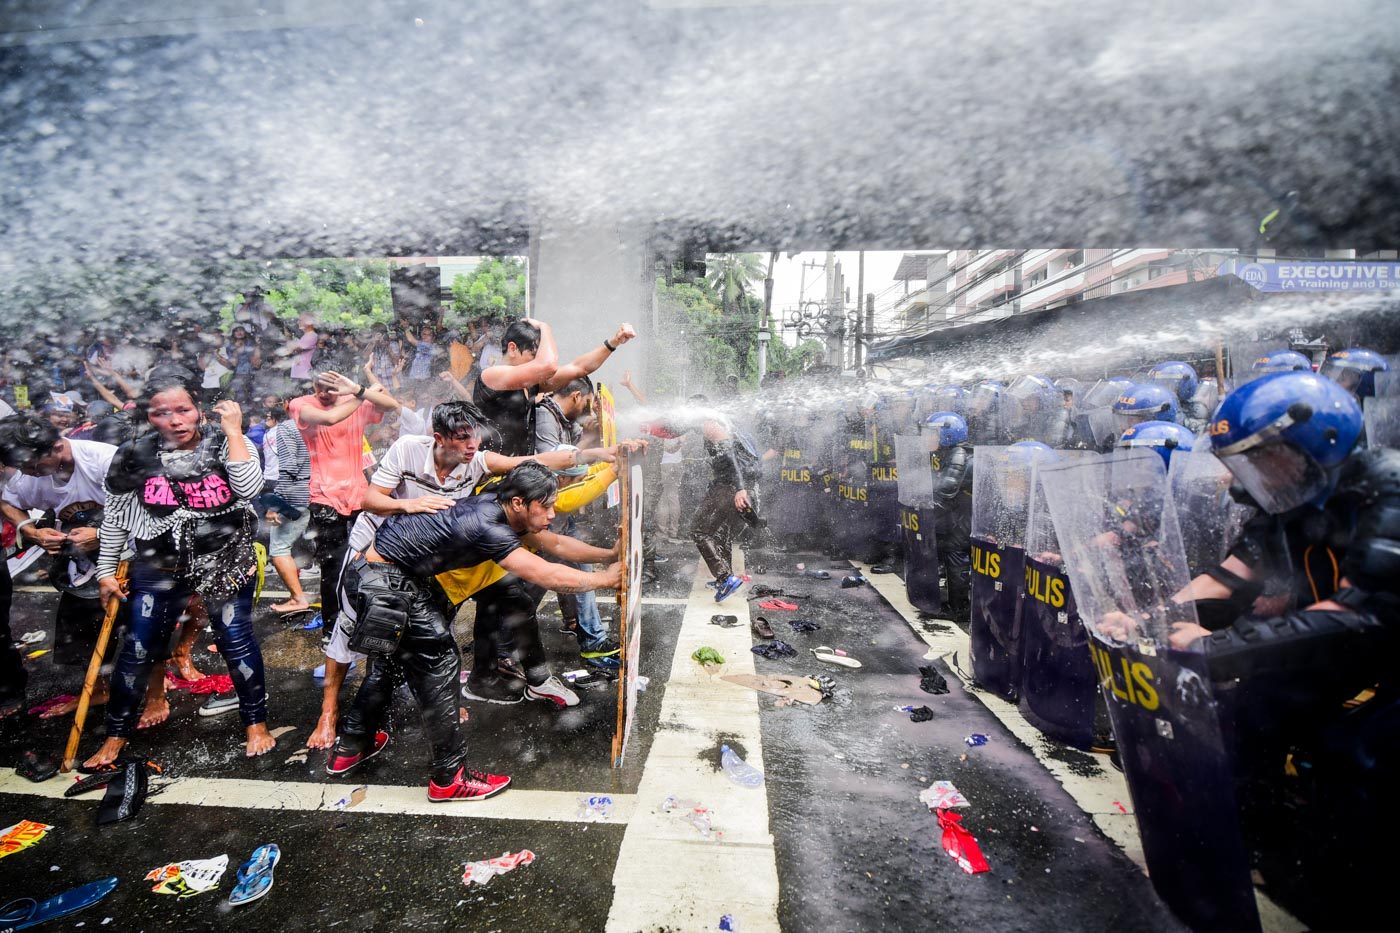 REPEL. To repel protesters, police use water cannons and sonic alarm. 